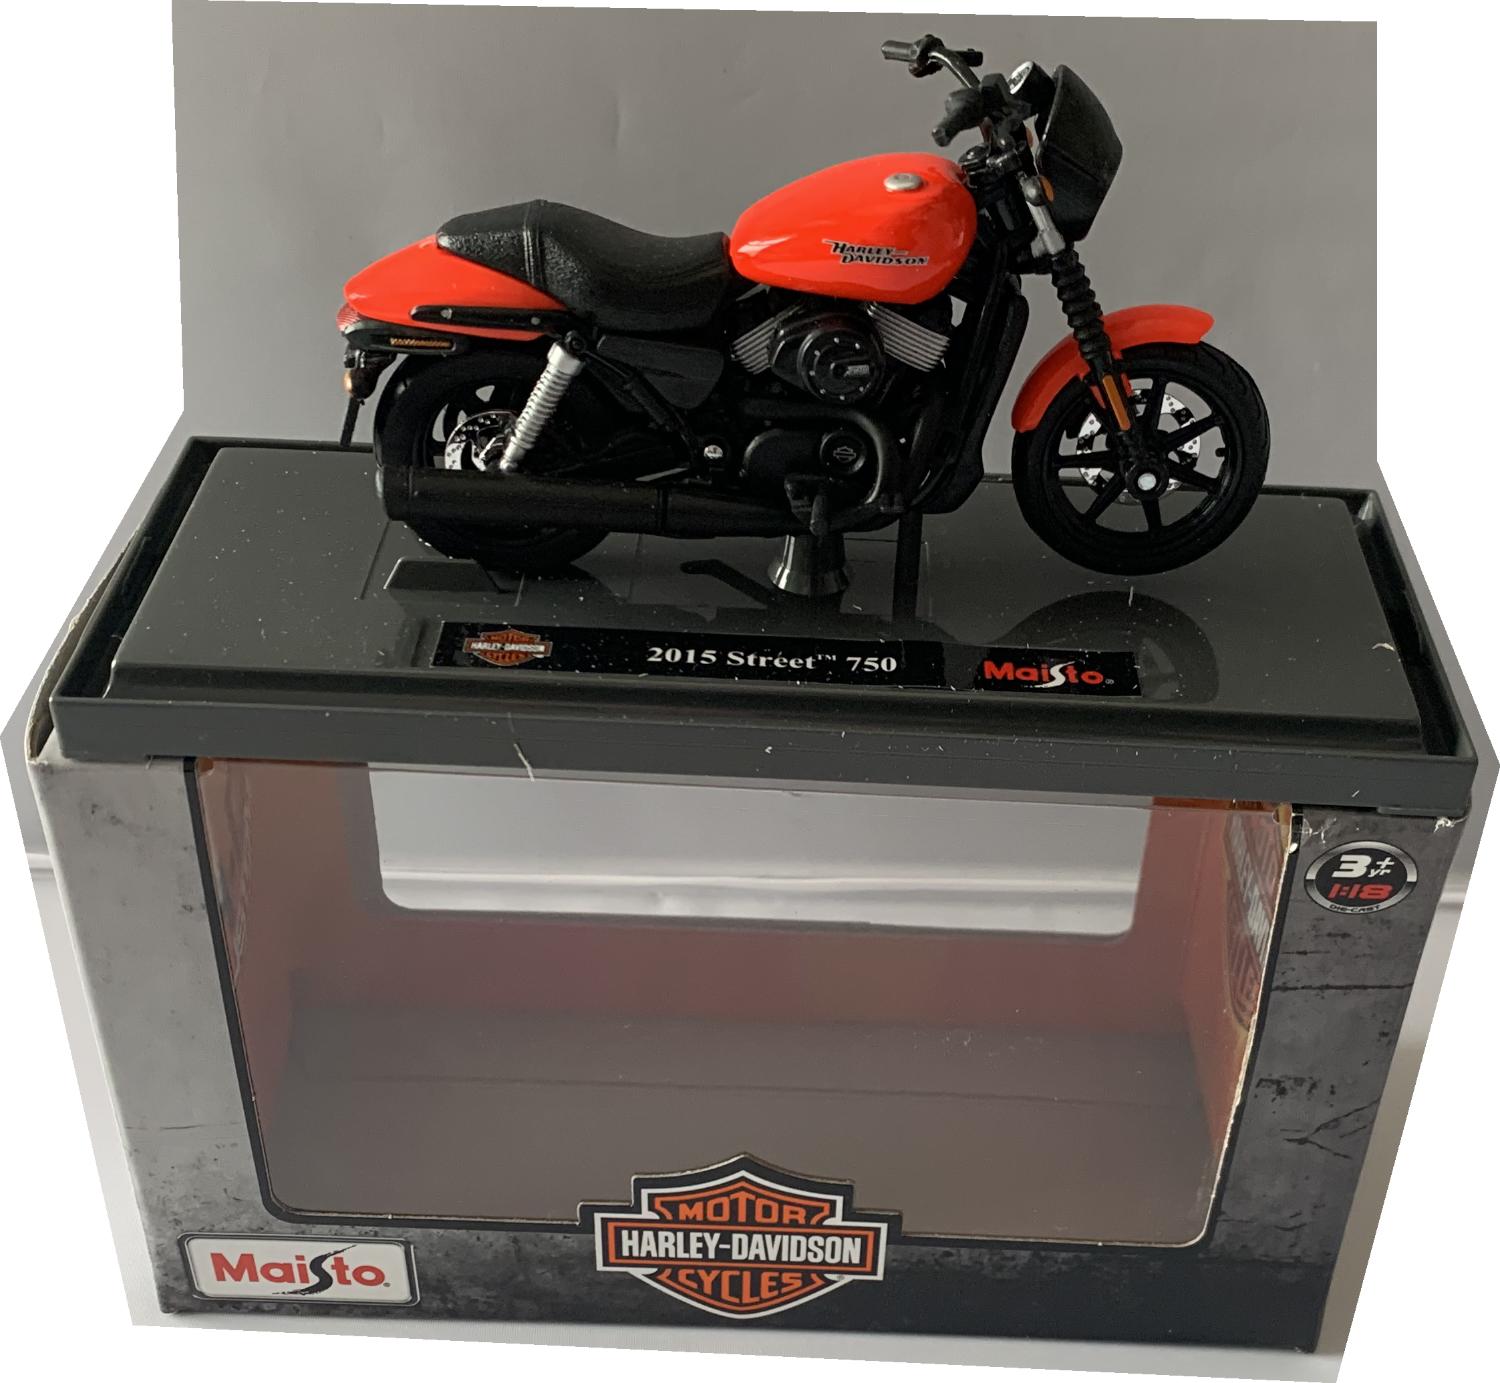 Harley Davidson 2015 Street 750 in bright red / black 1:18 scale model from Maisto